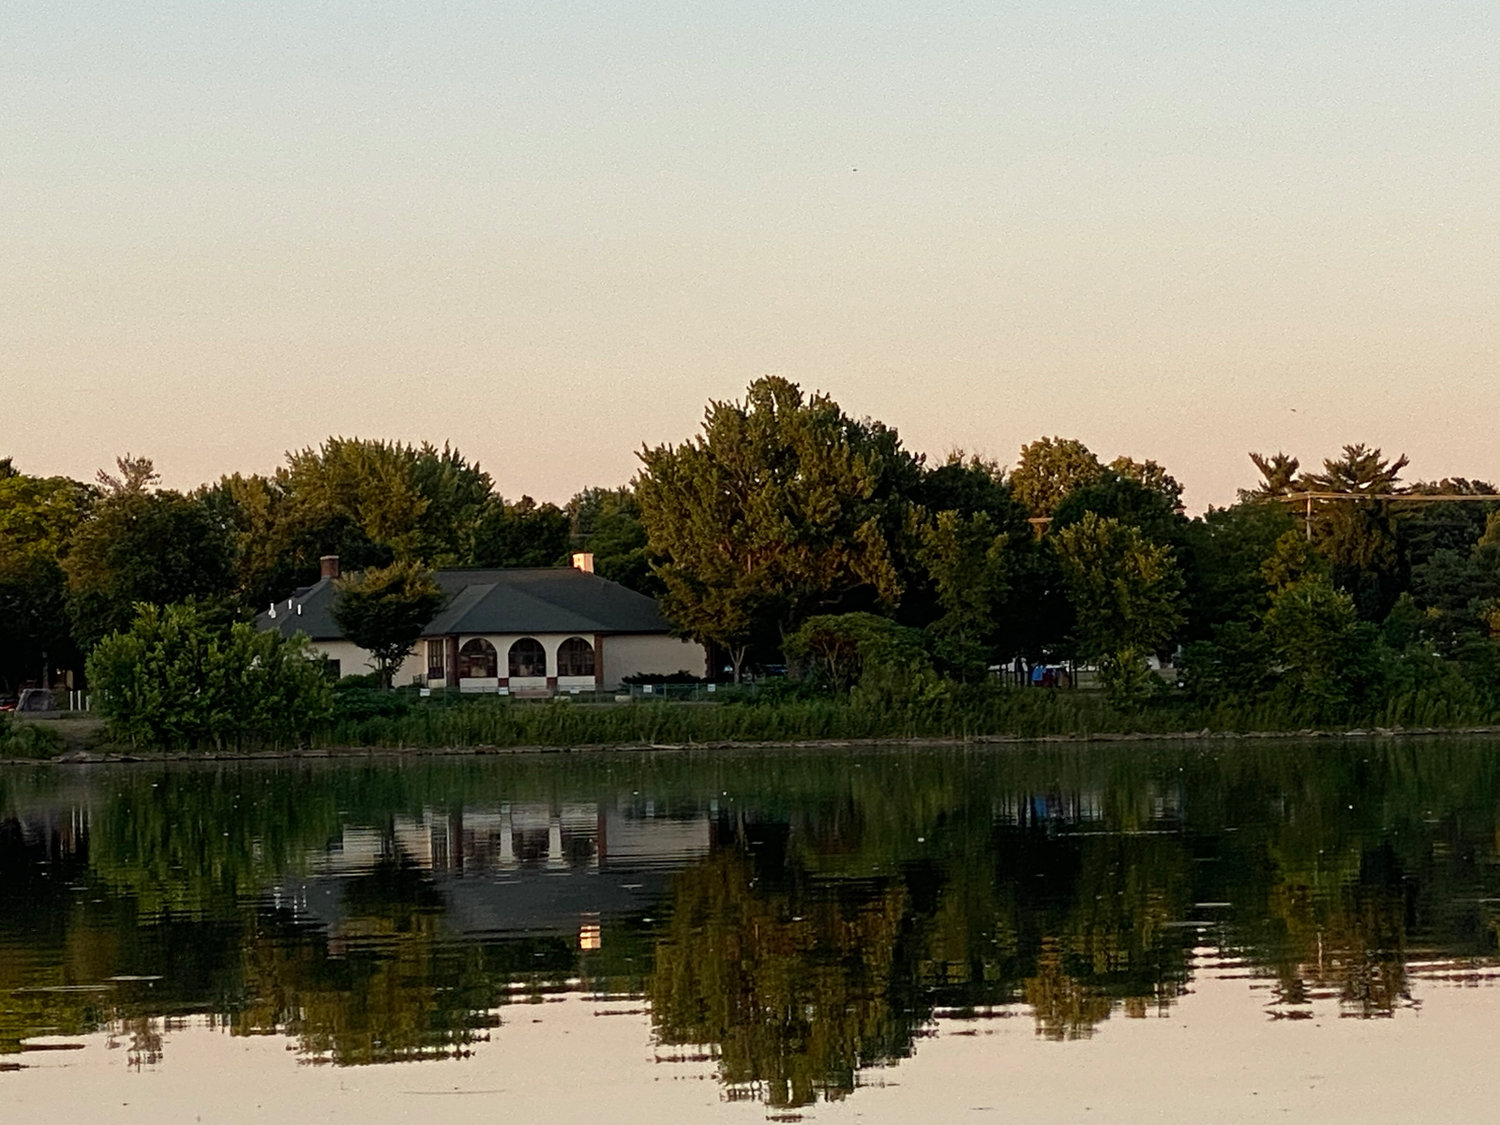 A view around Lake Hiawatha from a kayak, June 22, 2022. This is north, facing the Hiawatha Recreation Center and playground.